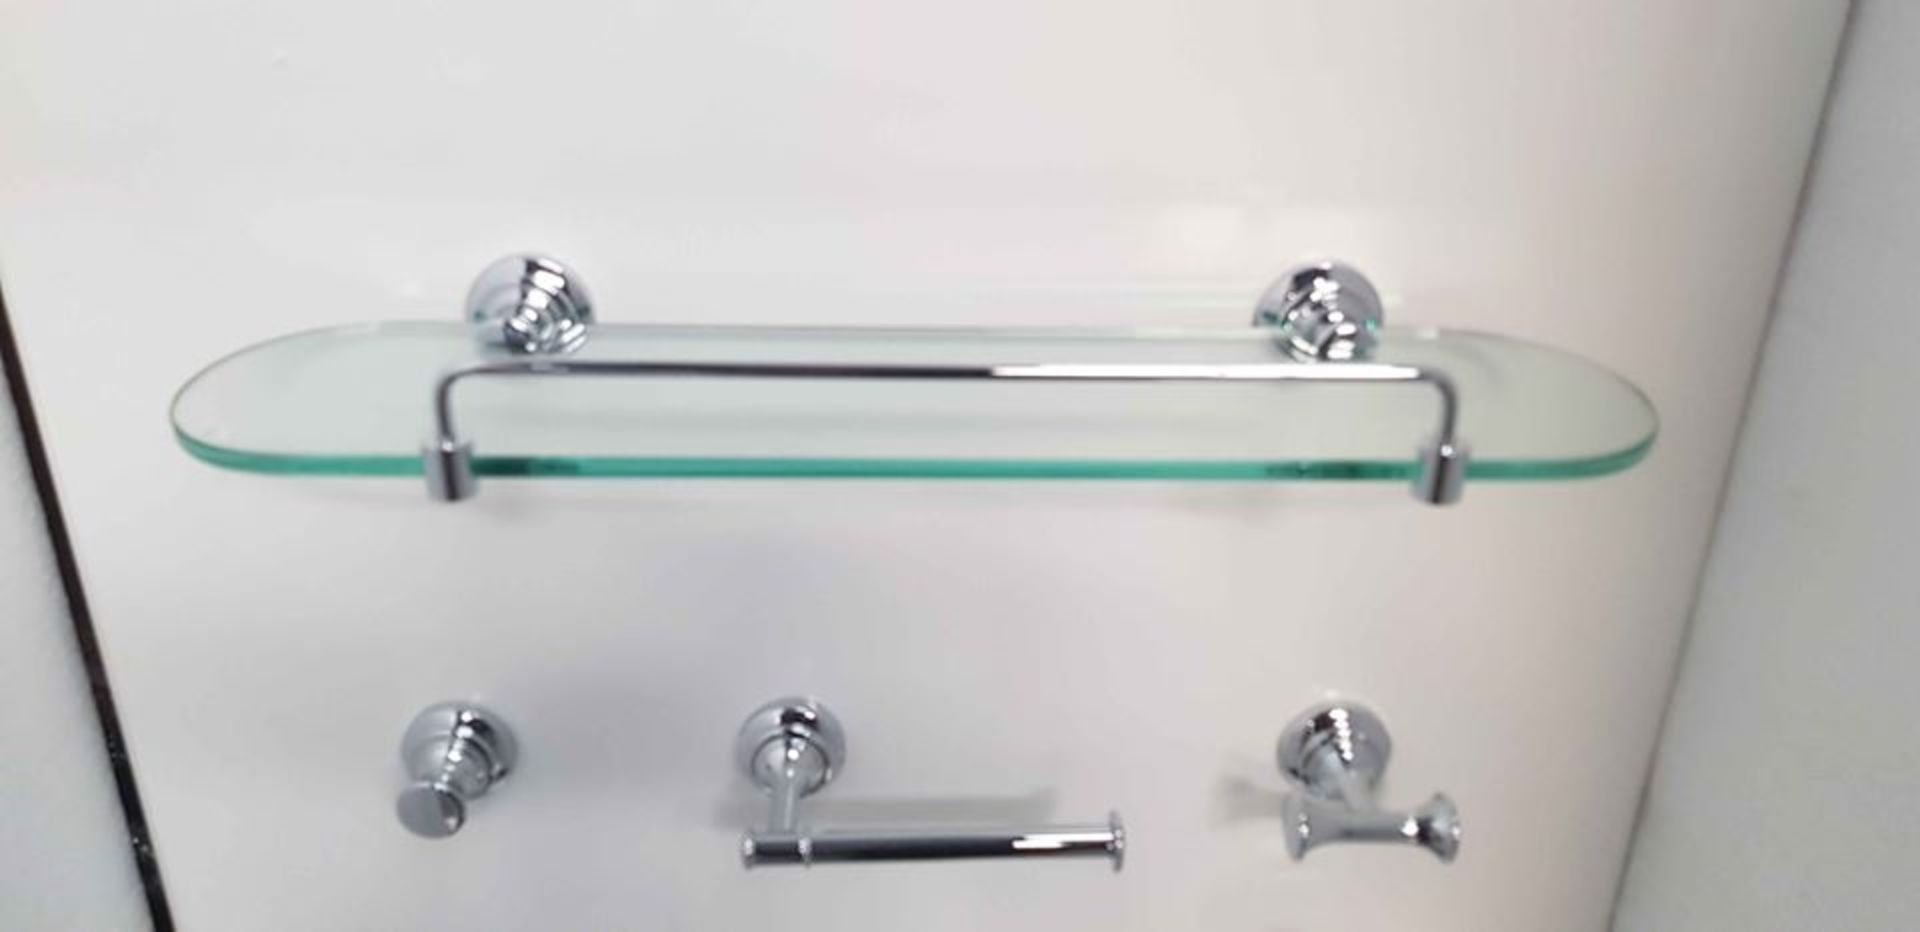 Bathroom. 6 x Transition 12 Piece, Very High Quality, Bathroom Accessory Set In Polished Chrome & - Image 3 of 5